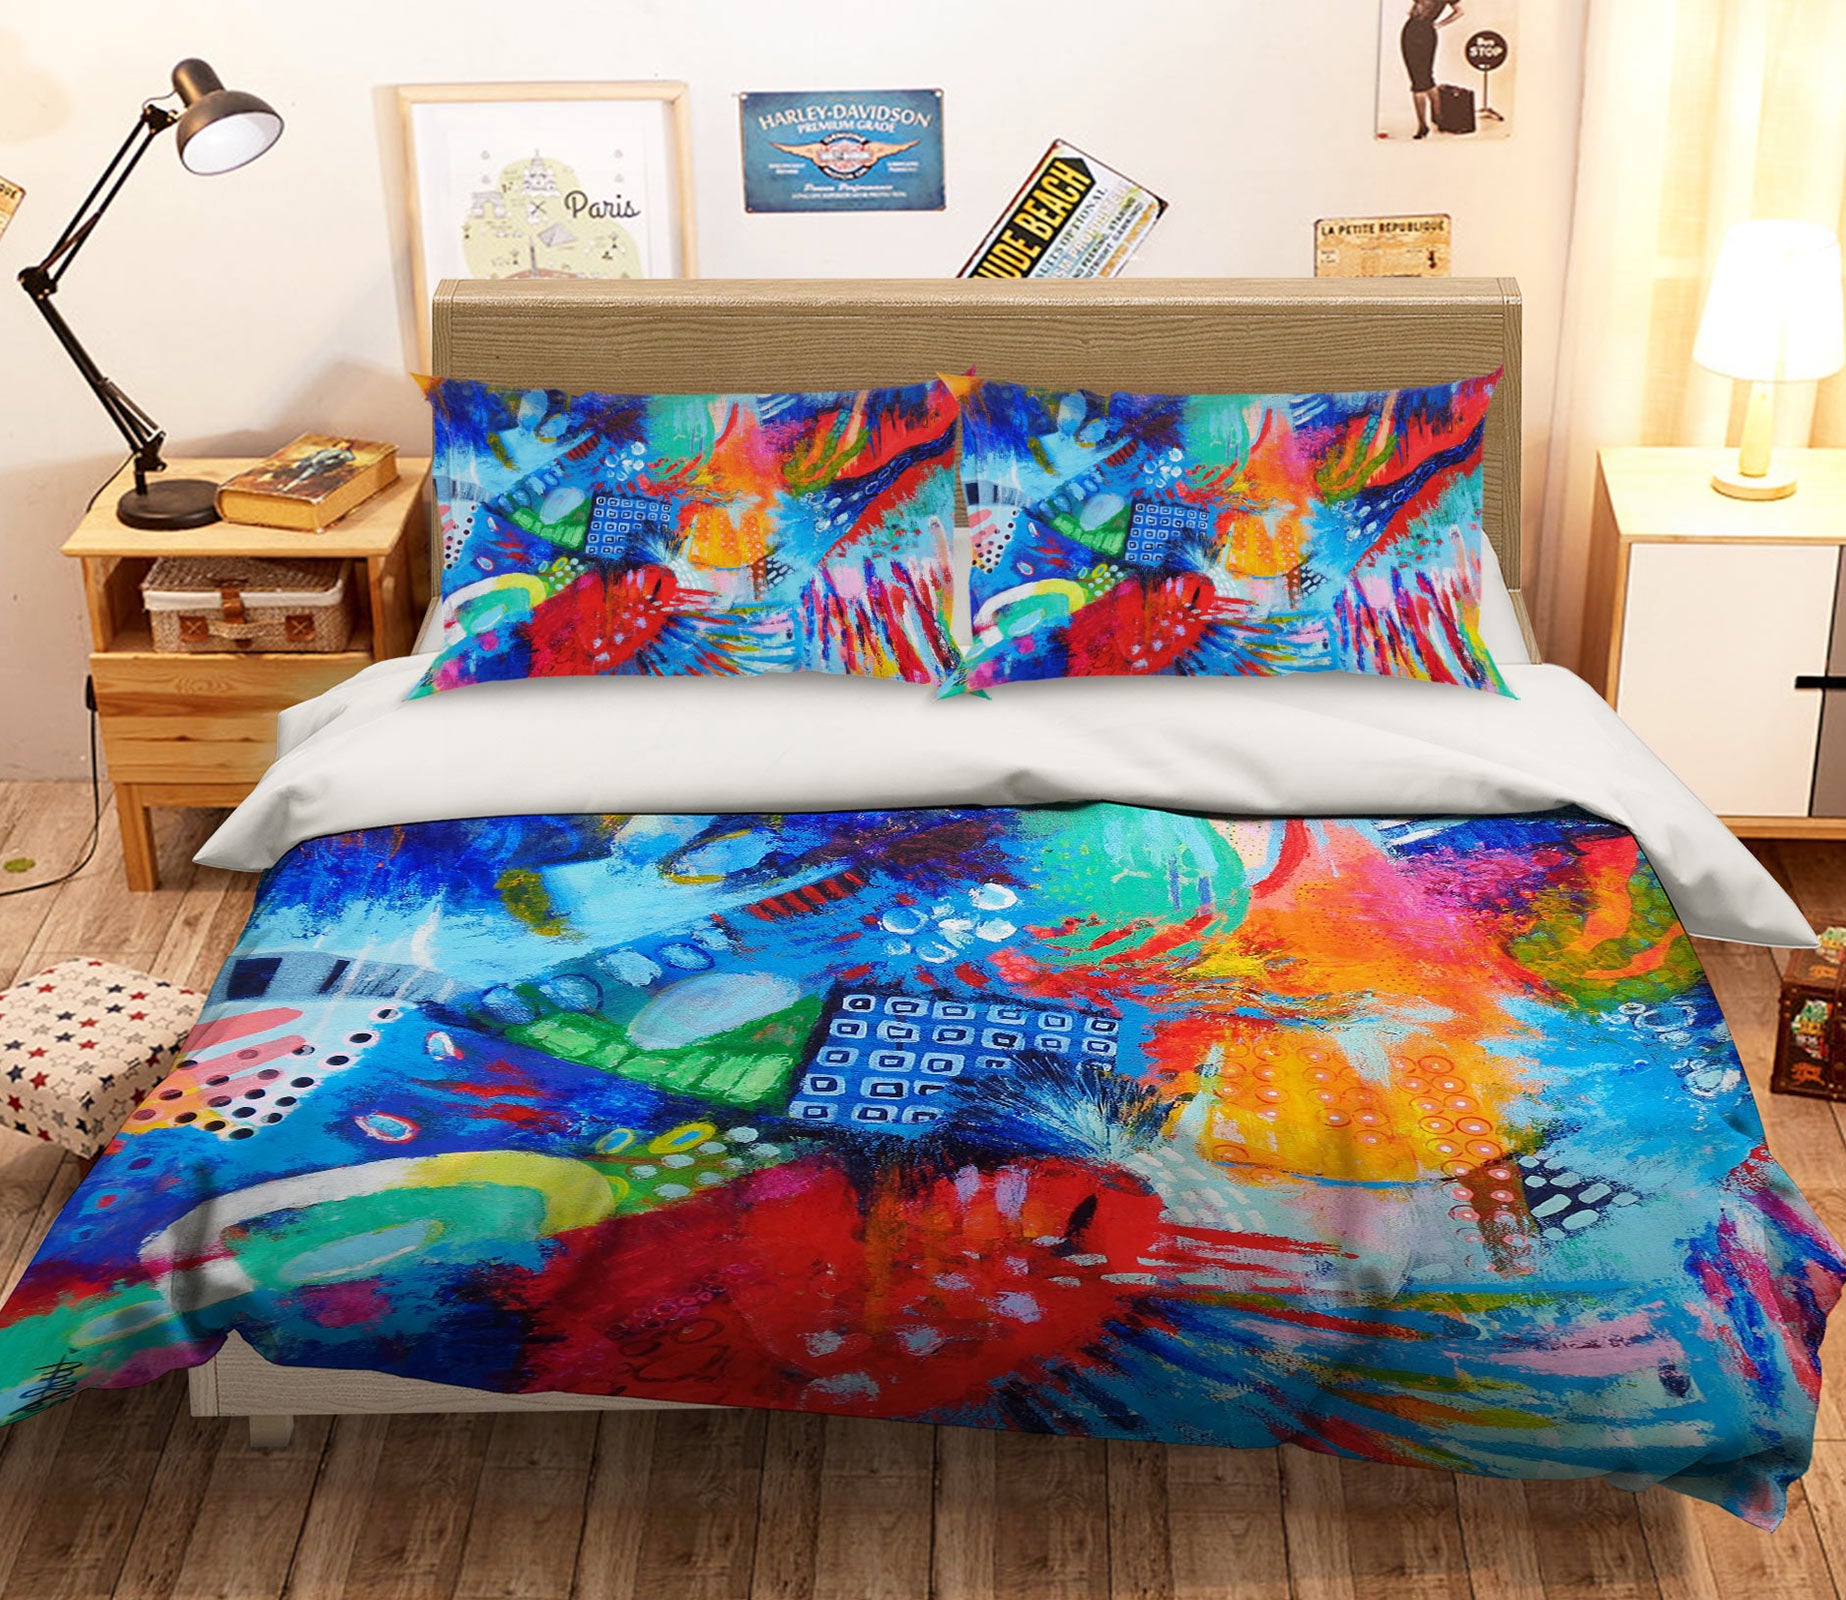 3D Painted Painting 1189 Misako Chida Bedding Bed Pillowcases Quilt Cover Duvet Cover